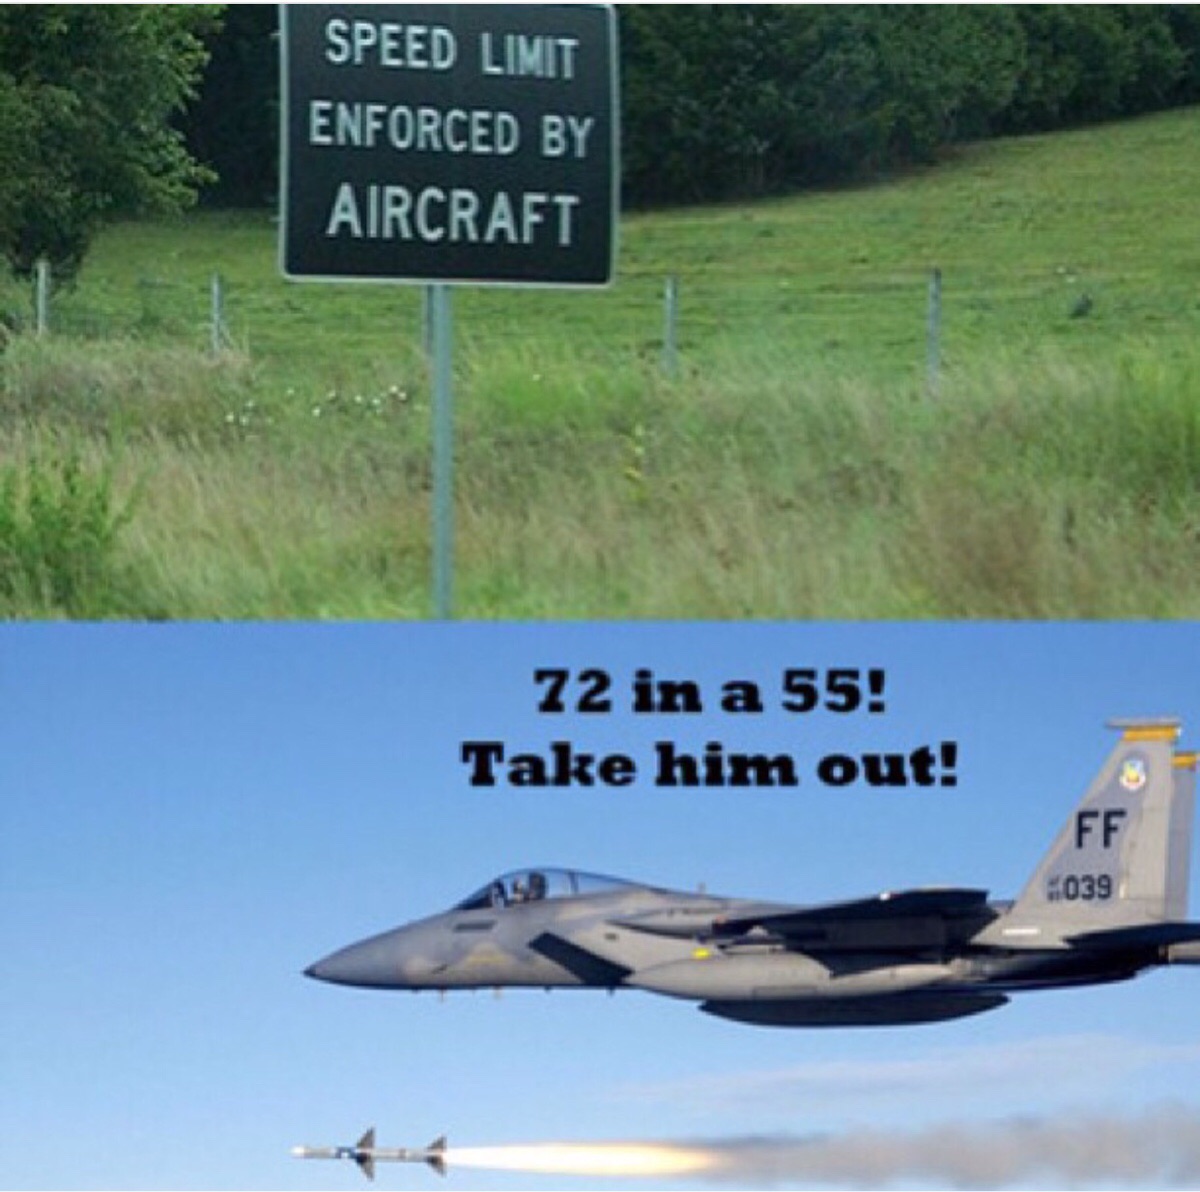 speed limit enforced by aircraft meme - Speed Limit Enforced By Aircraft 72 in a 55! Take him out! Fe 6039